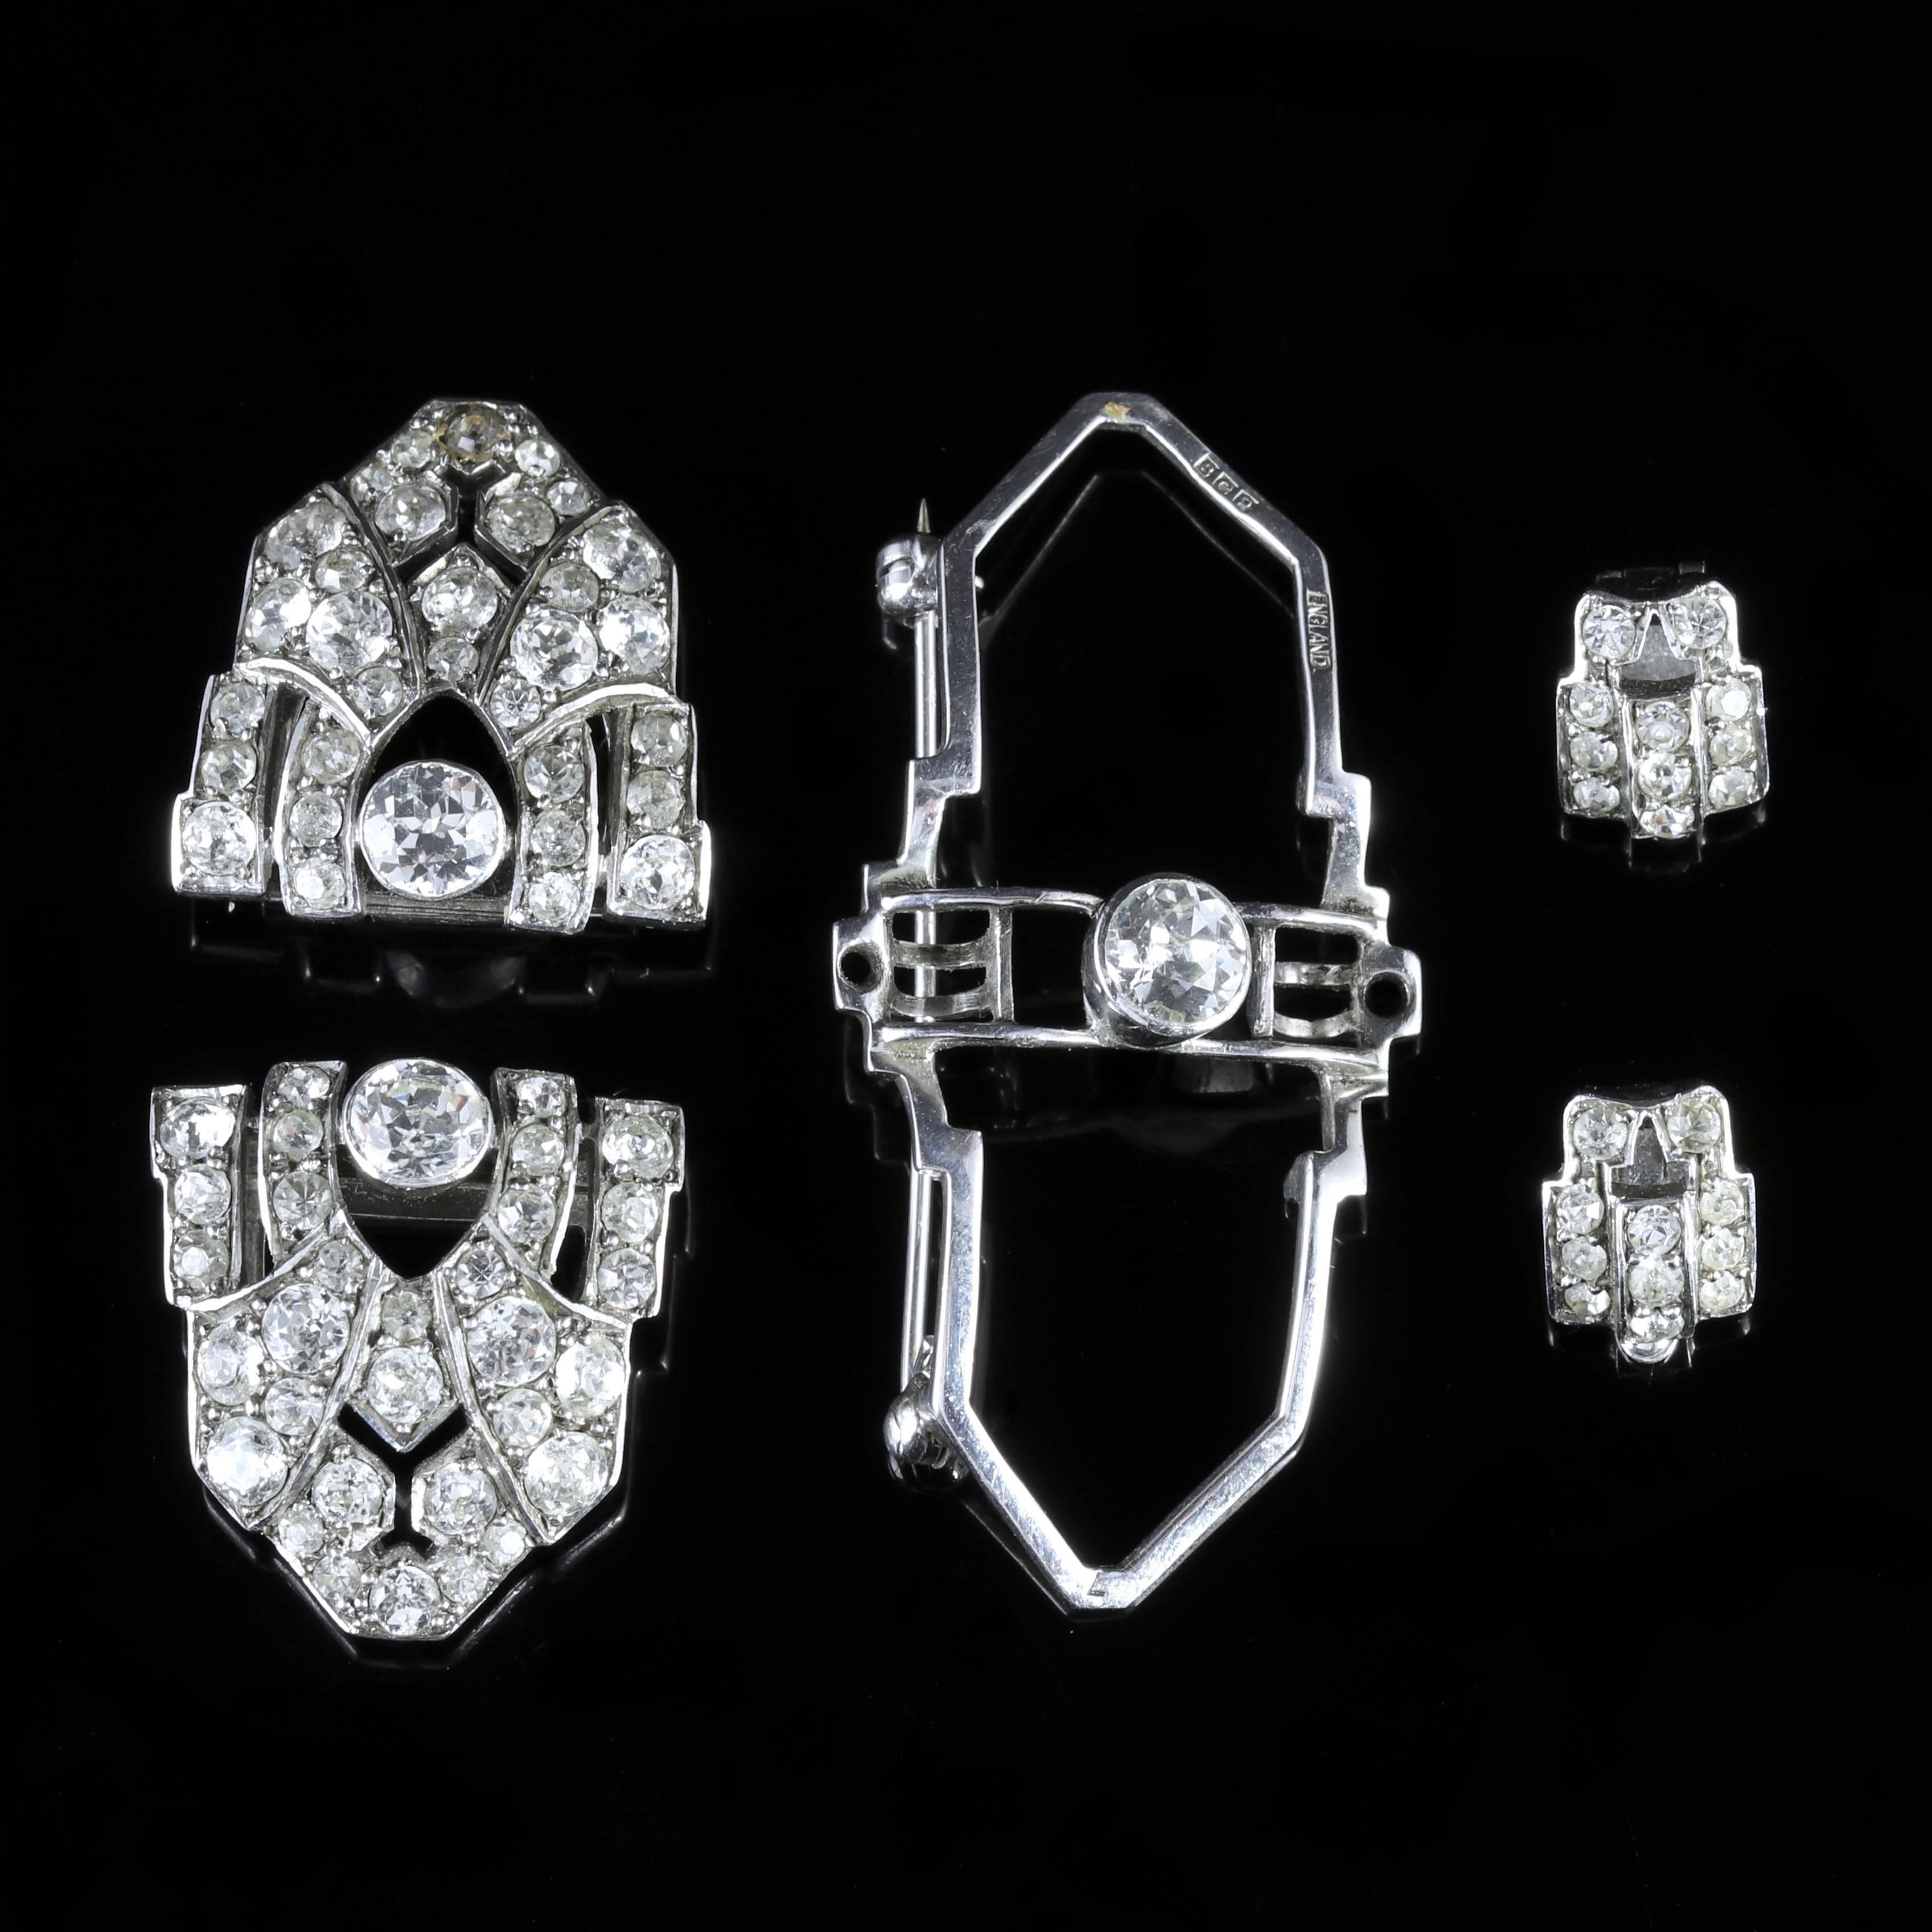 This fabulous antique Art Deco Silver Paste brooch is in a league of its own!

Genuine Art Deco, Circa 1920. 

This beautiful brooch separates into 4 pieces - two small clip on earrings, as well as two sparkling clips that would look fabulous on a